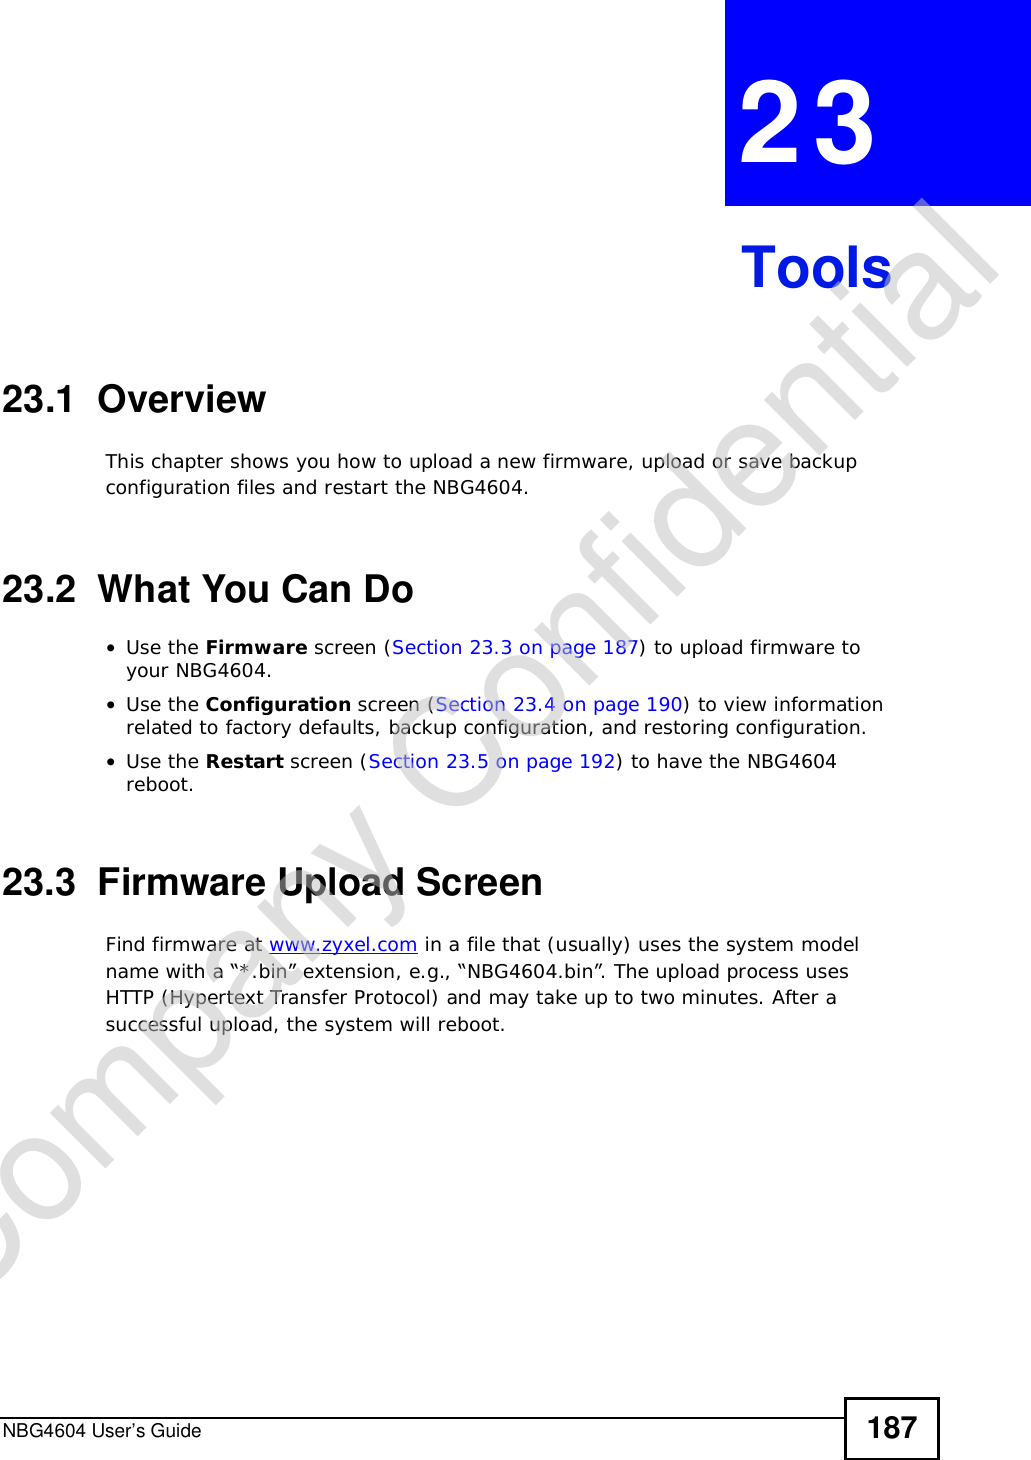 NBG4604 User’s Guide 187CHAPTER 23Tools23.1  OverviewThis chapter shows you how to upload a new firmware, upload or save backup configuration files and restart the NBG4604.23.2  What You Can Do•Use the Firmware screen (Section 23.3 on page 187) to upload firmware to your NBG4604.•Use the Configuration screen (Section 23.4 on page 190) to view information related to factory defaults, backup configuration, and restoring configuration.•Use the Restart screen (Section 23.5 on page 192) to have the NBG4604 reboot.23.3  Firmware Upload ScreenFind firmware at www.zyxel.com in a file that (usually) uses the system model name with a “*.bin” extension, e.g., “NBG4604.bin”. The upload process uses HTTP (Hypertext Transfer Protocol) and may take up to two minutes. After a successful upload, the system will reboot.Company Confidential